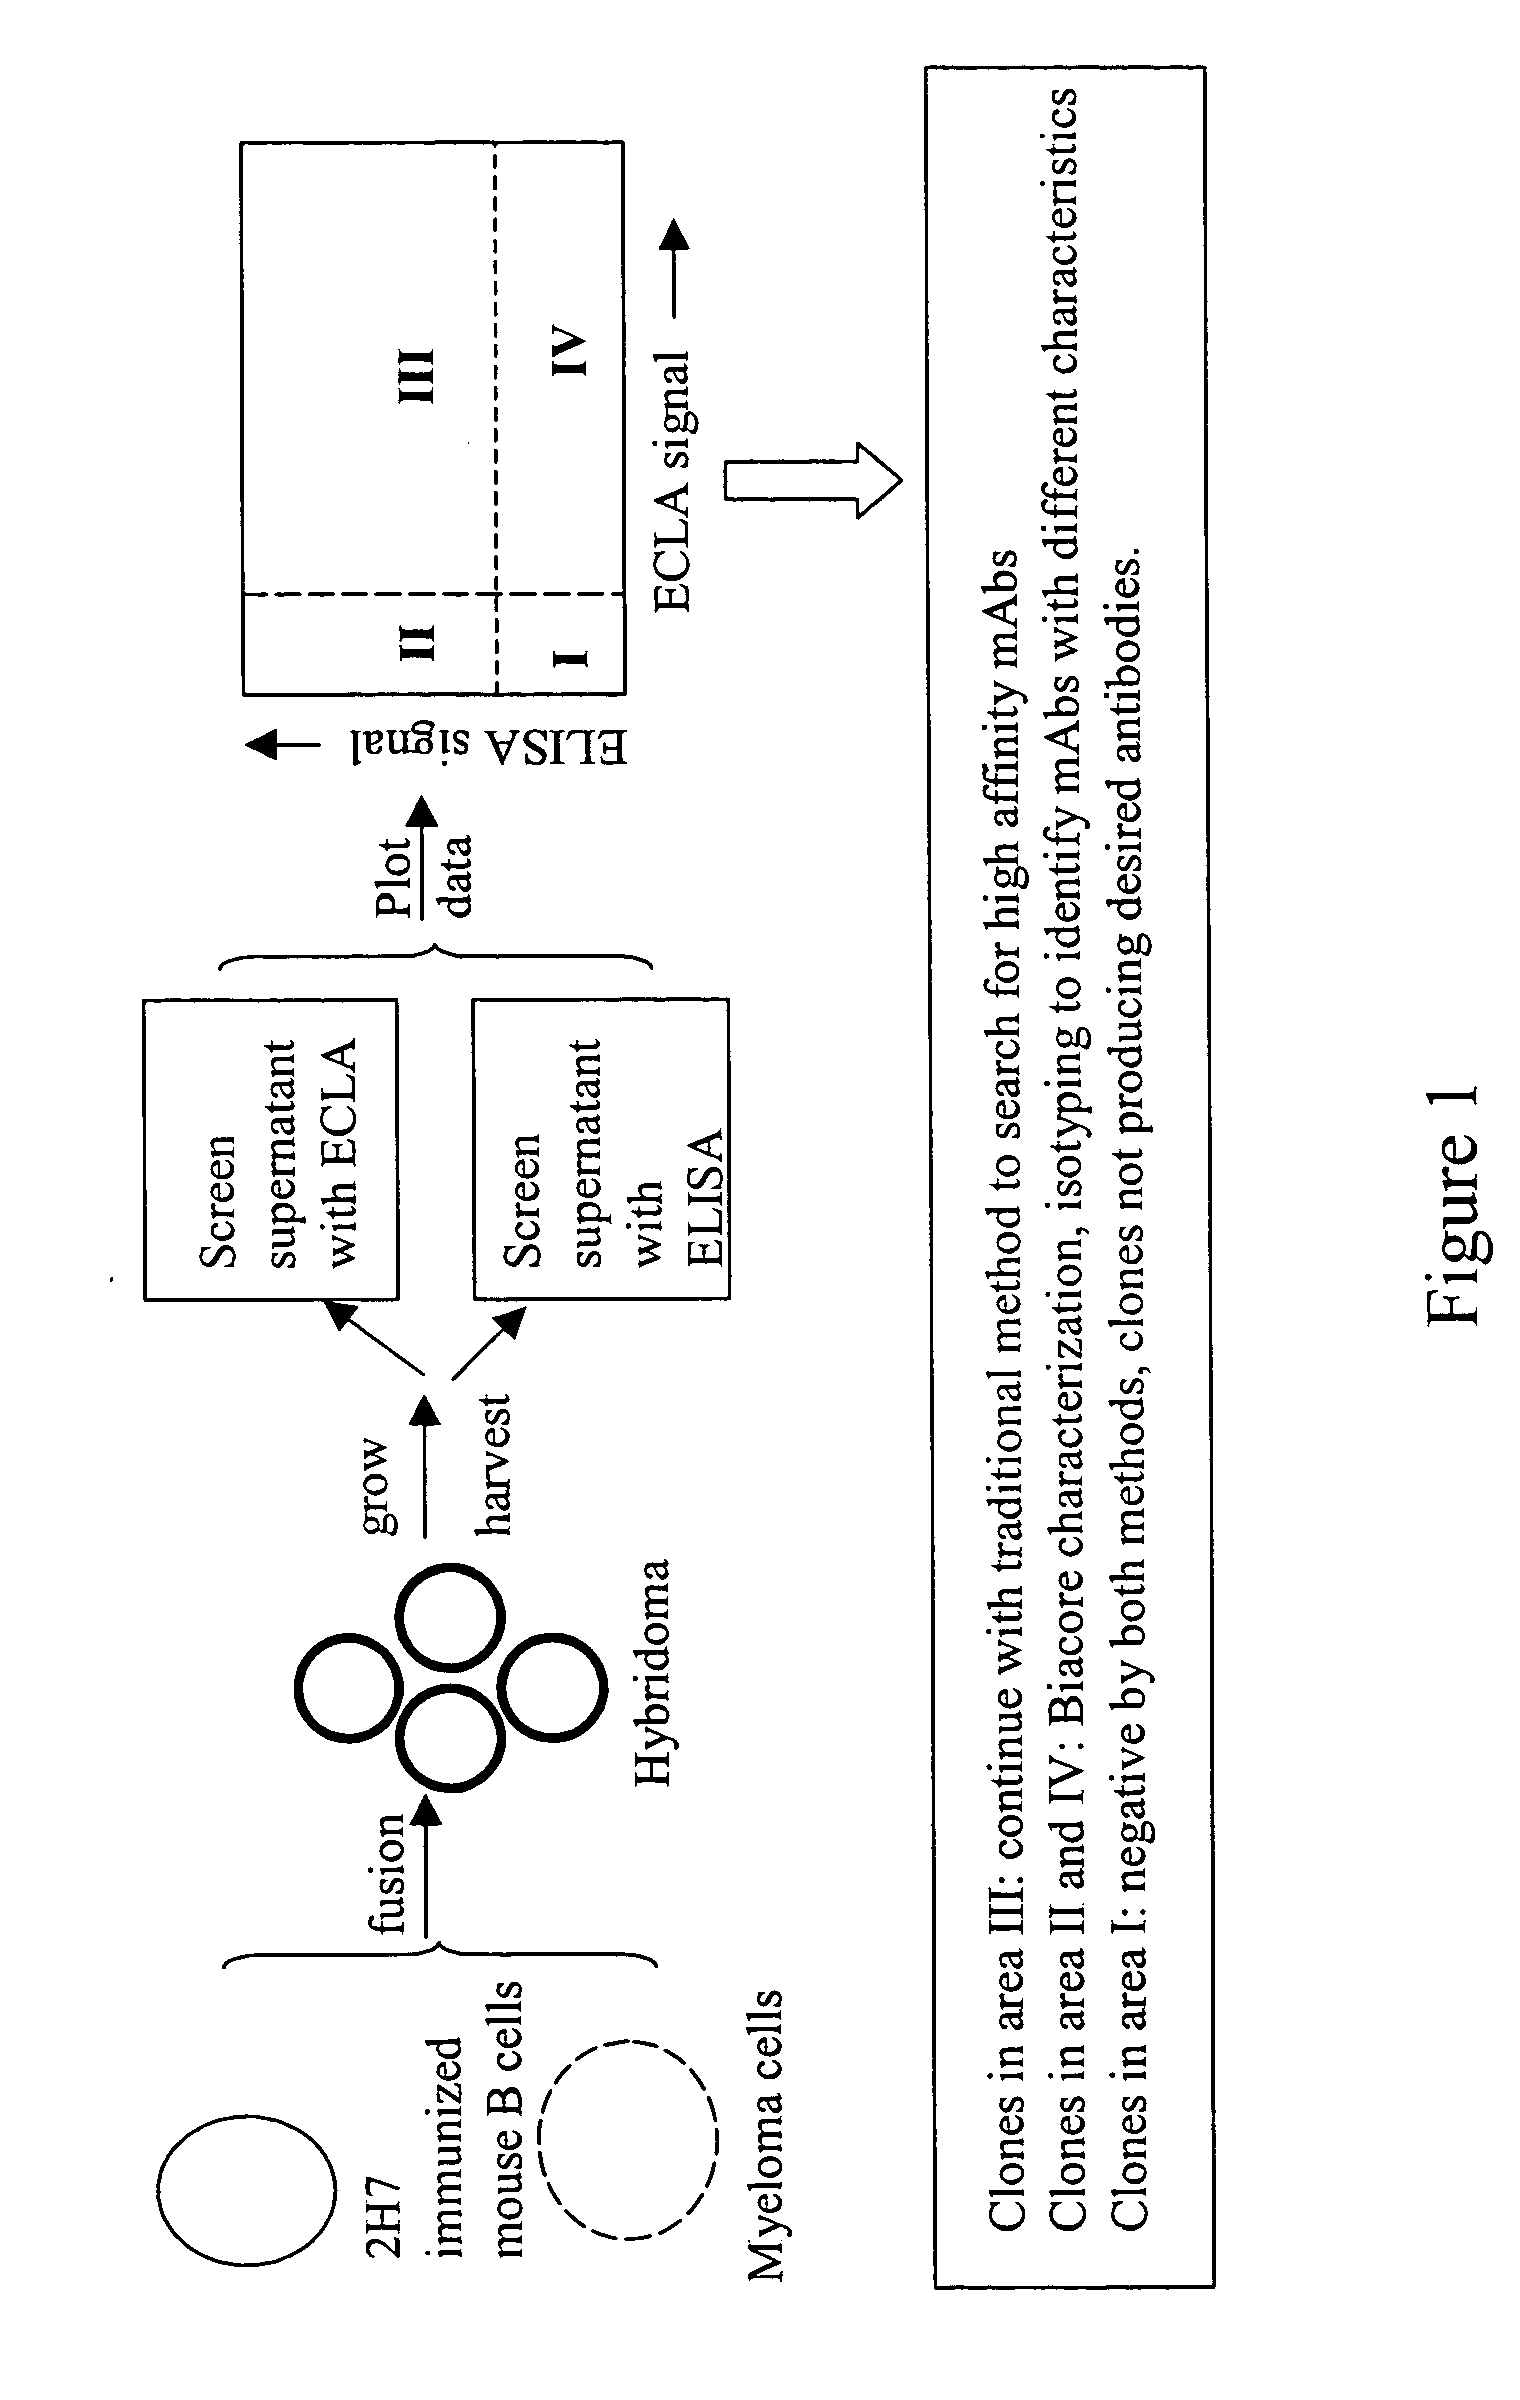 Cross-screening system and methods for detecting a molecule having binding affinity for a target molecule